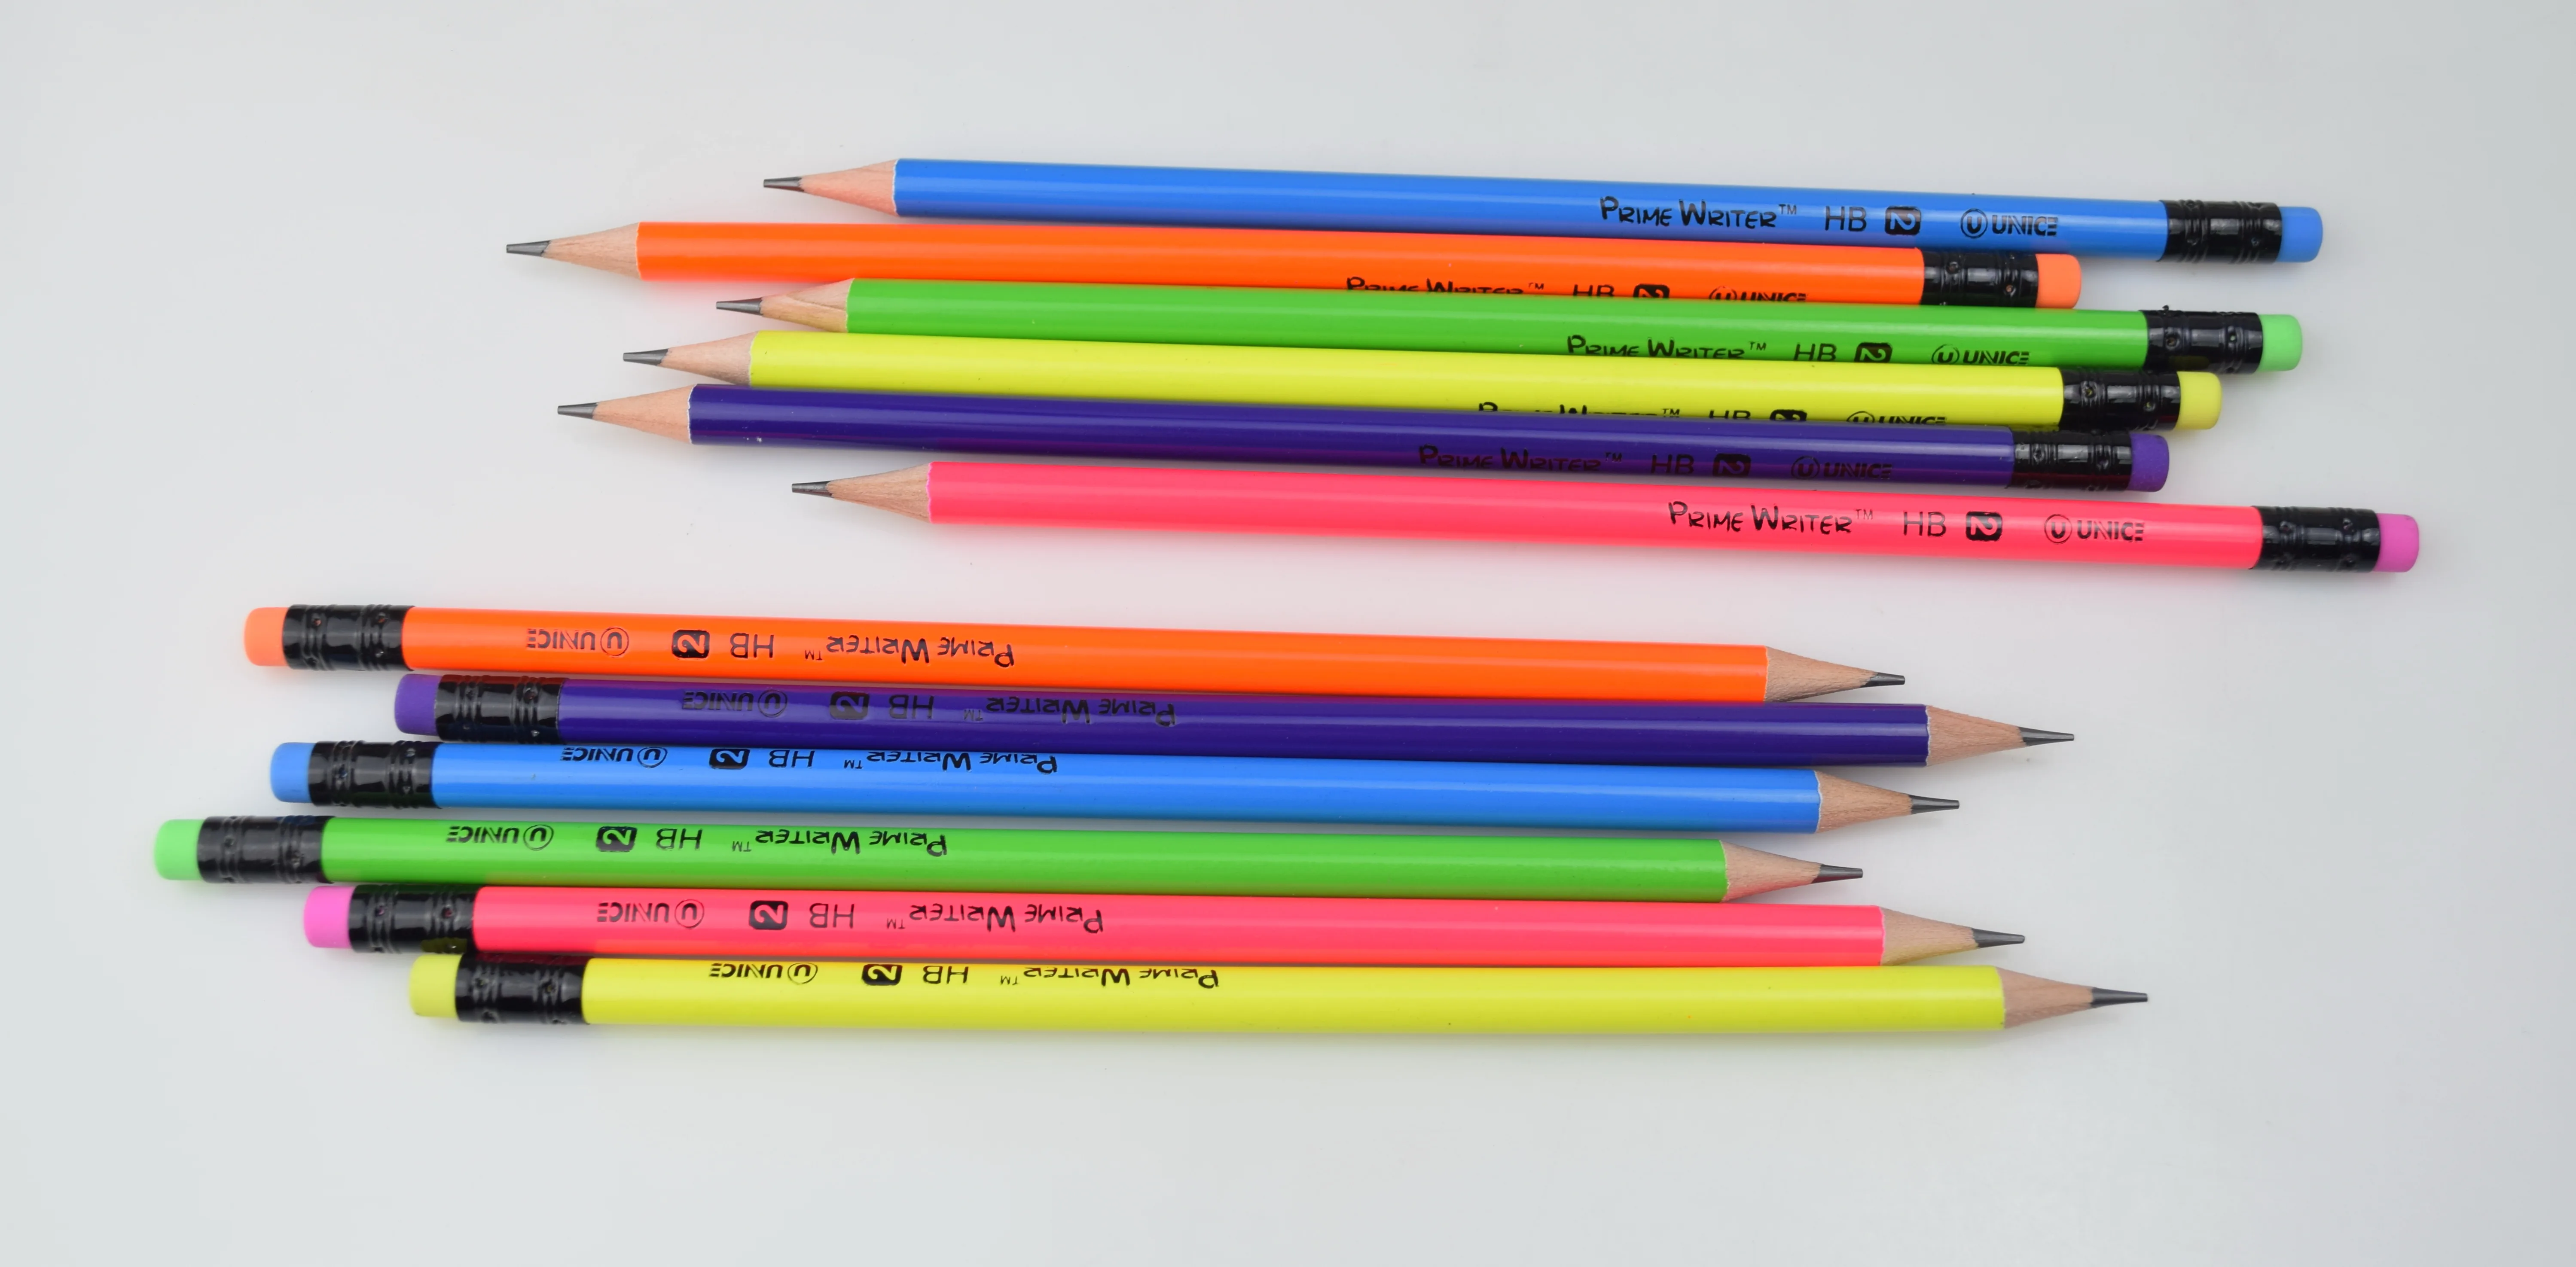 High Quality Fluorescent Hb Pencil Hb Pencil,Wood Hb Pencil Ideal For